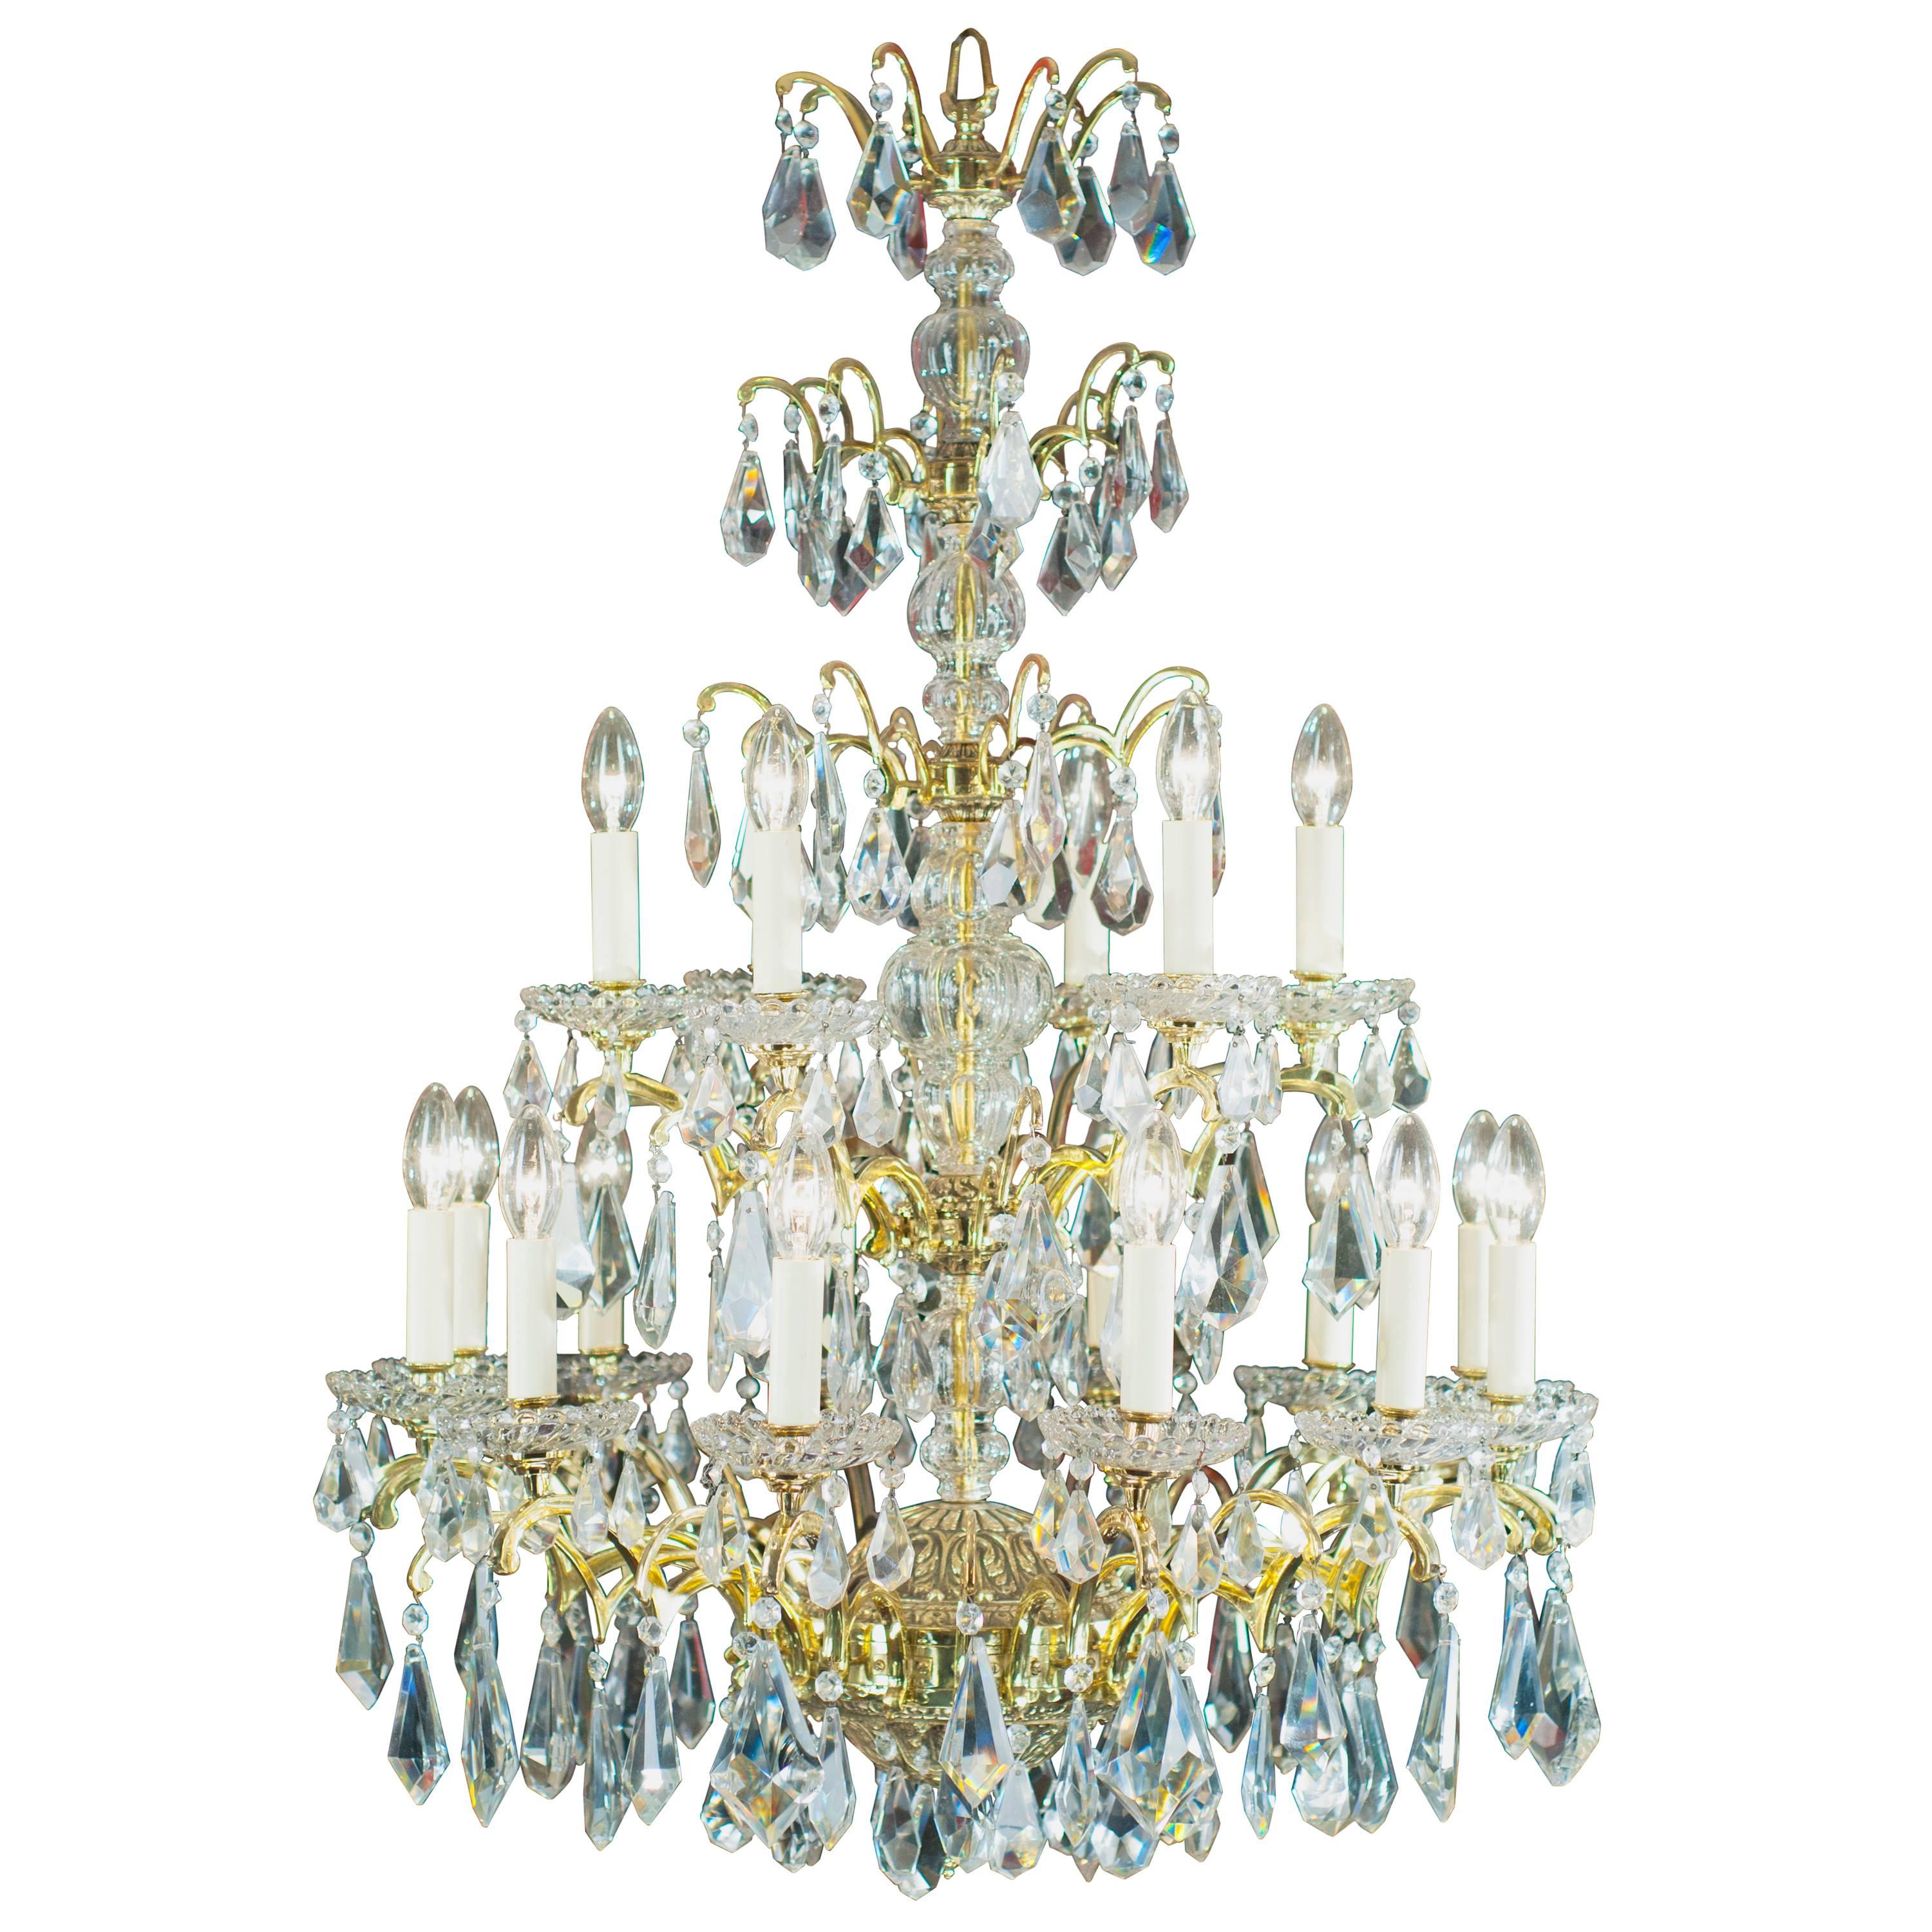 Large Cut Crystal Eighteen-Branch Early 20th Century Spanish Chandelier